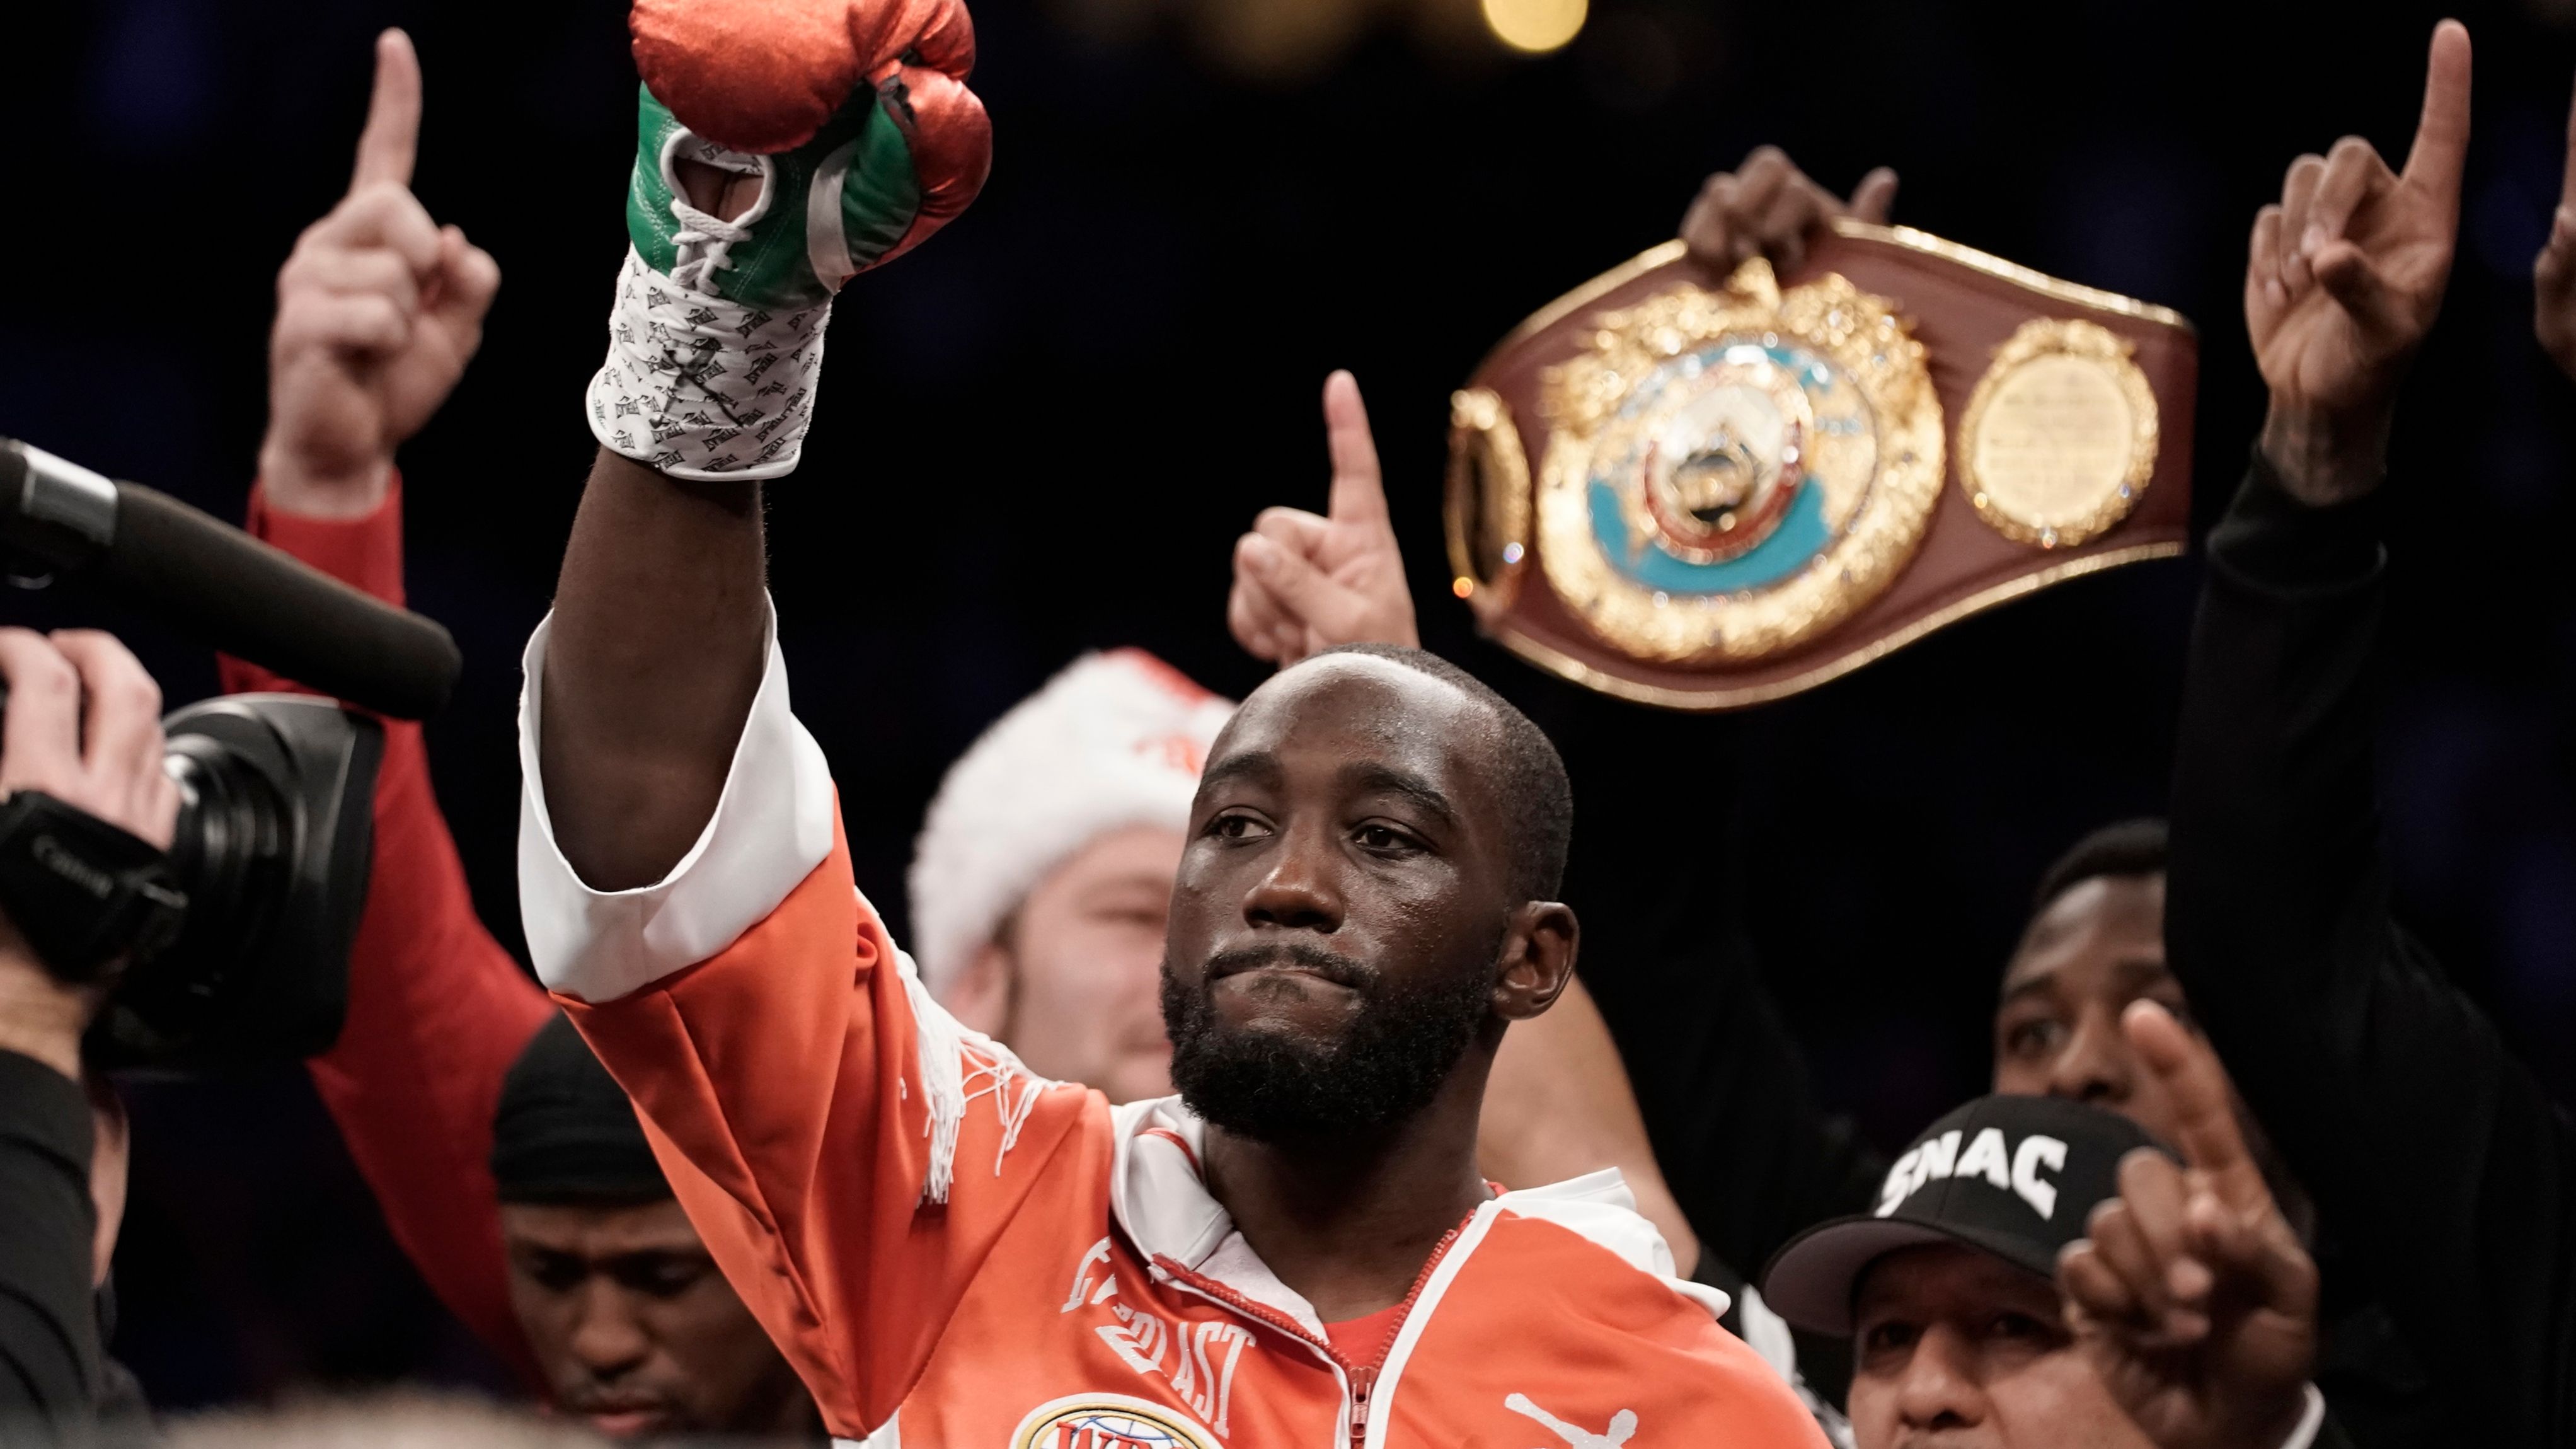 Terence Crawford Talks Cementing His Legacy As An All-Time Great With Upcoming Superfight Against Erroll Spence Jr